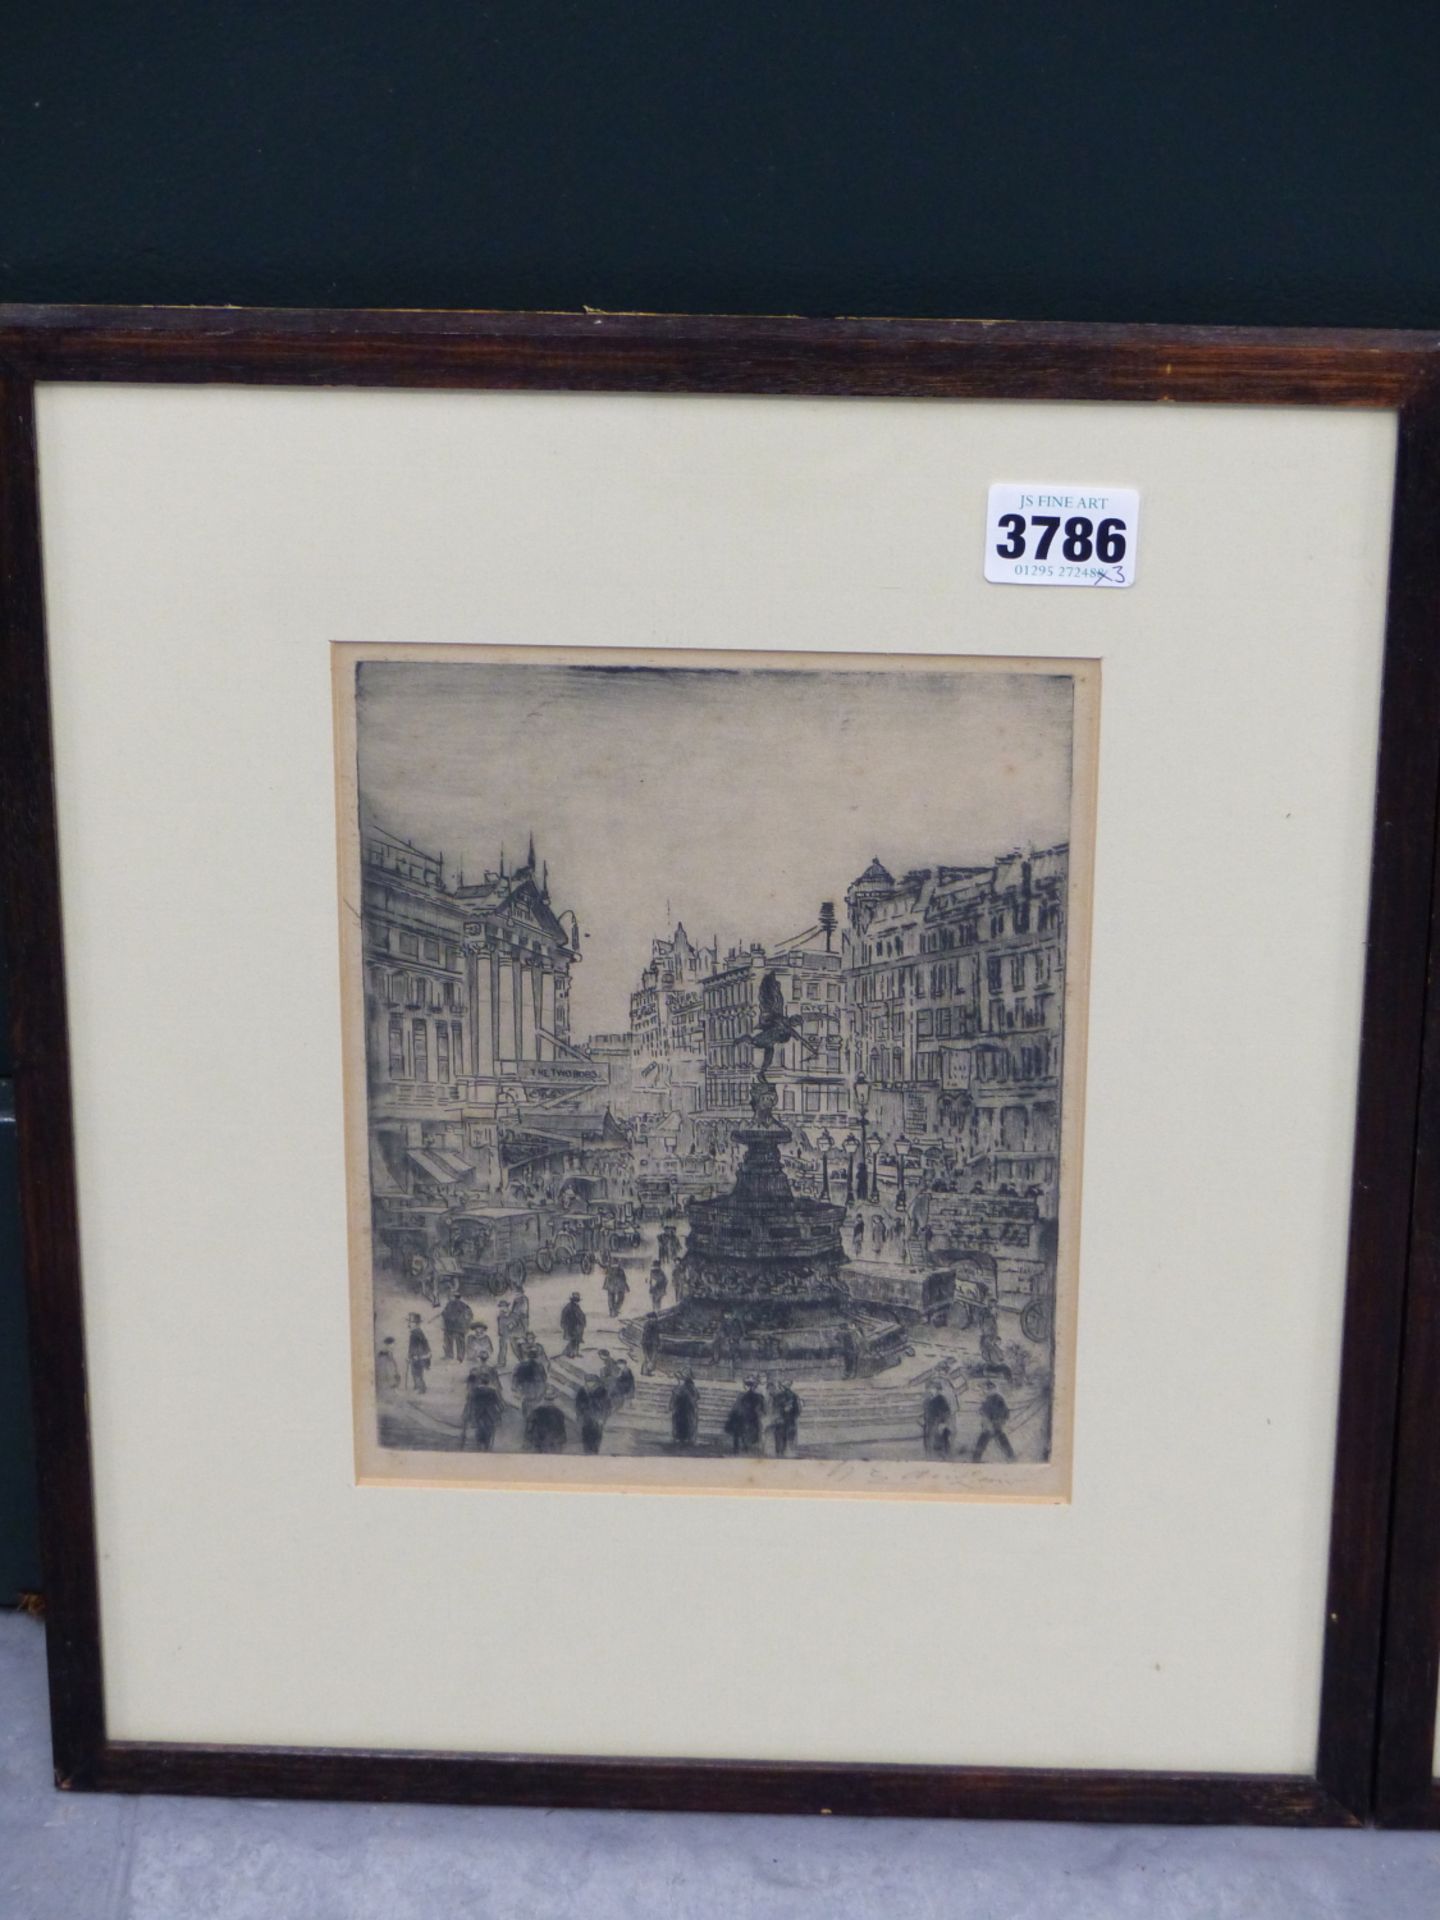 ** LAIDLAW? (EARLY 20TH CENTURY) TOWER BRIDGE LONDON & PICCADILLY CIRCUS. ETCHINGS. PENCIL SIGNED - Image 6 of 8